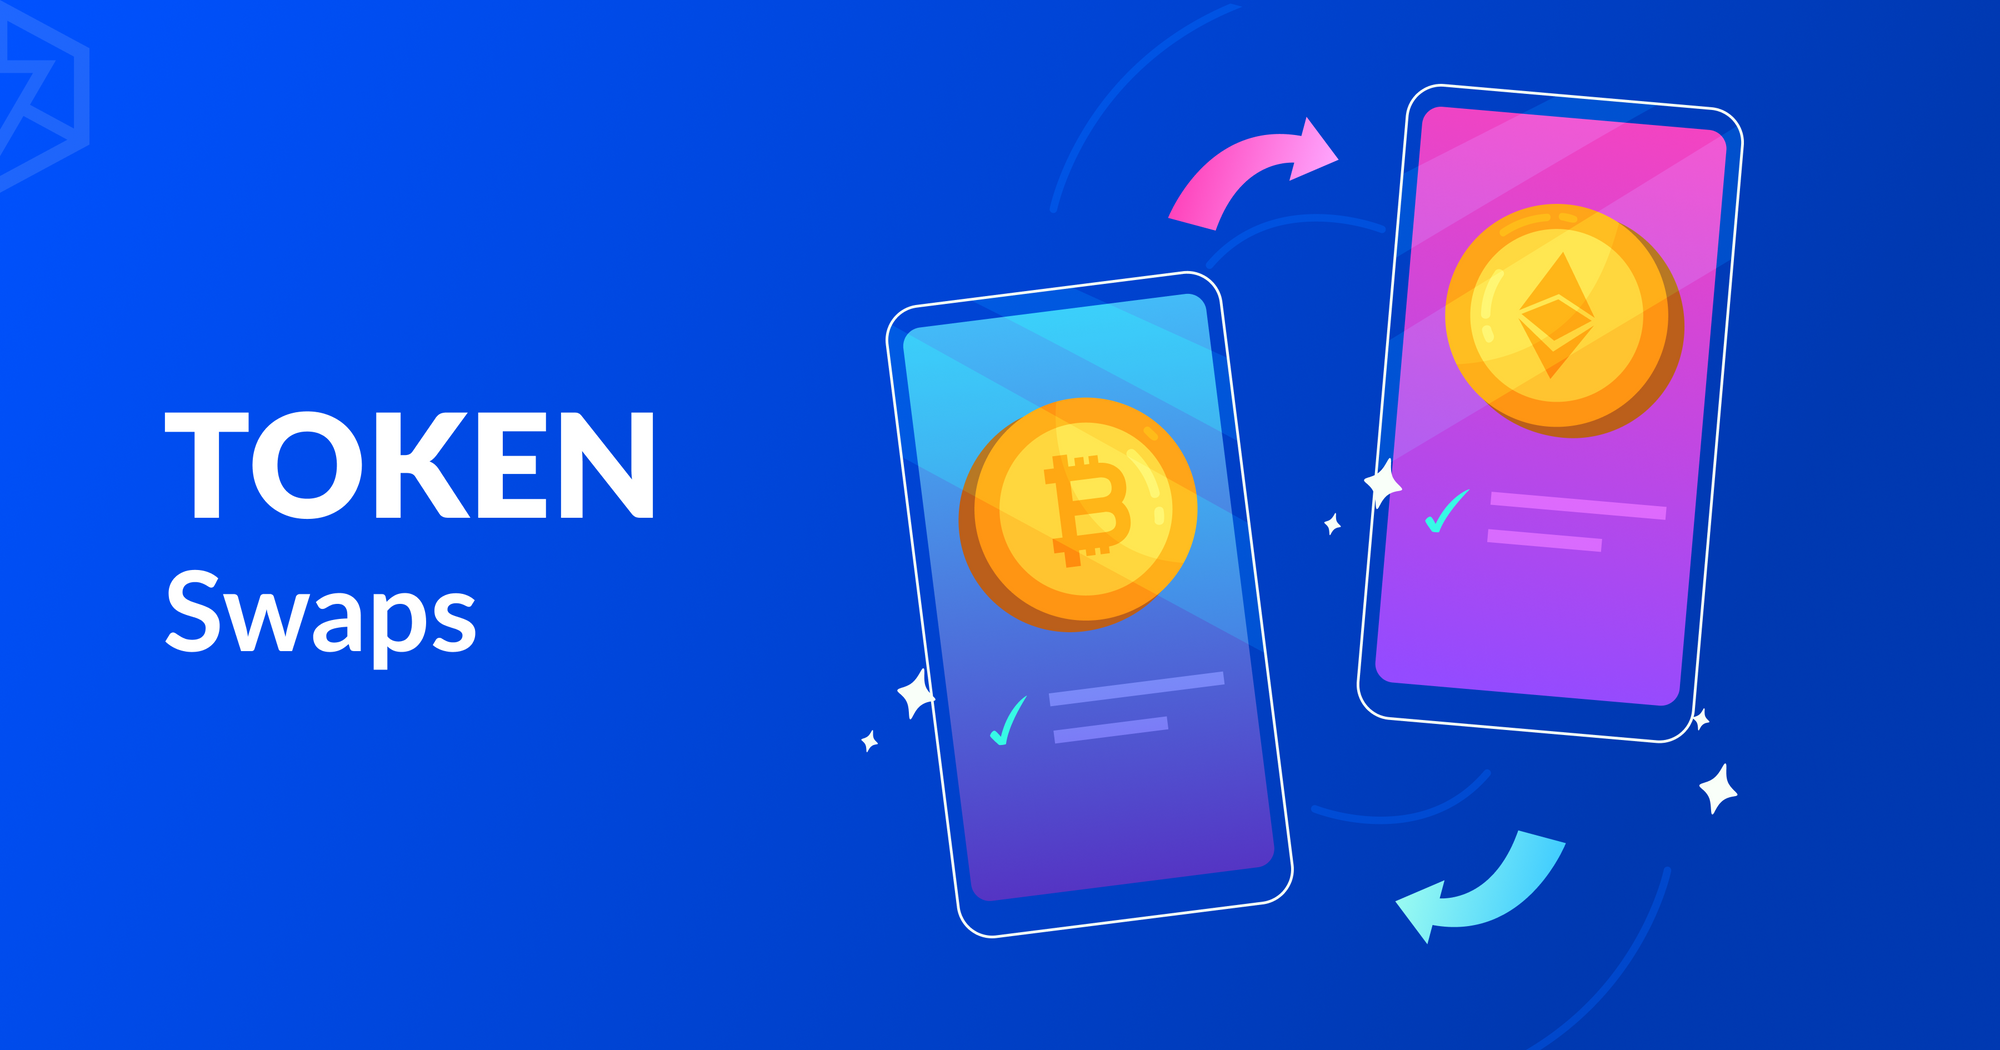 What are Token Swaps?